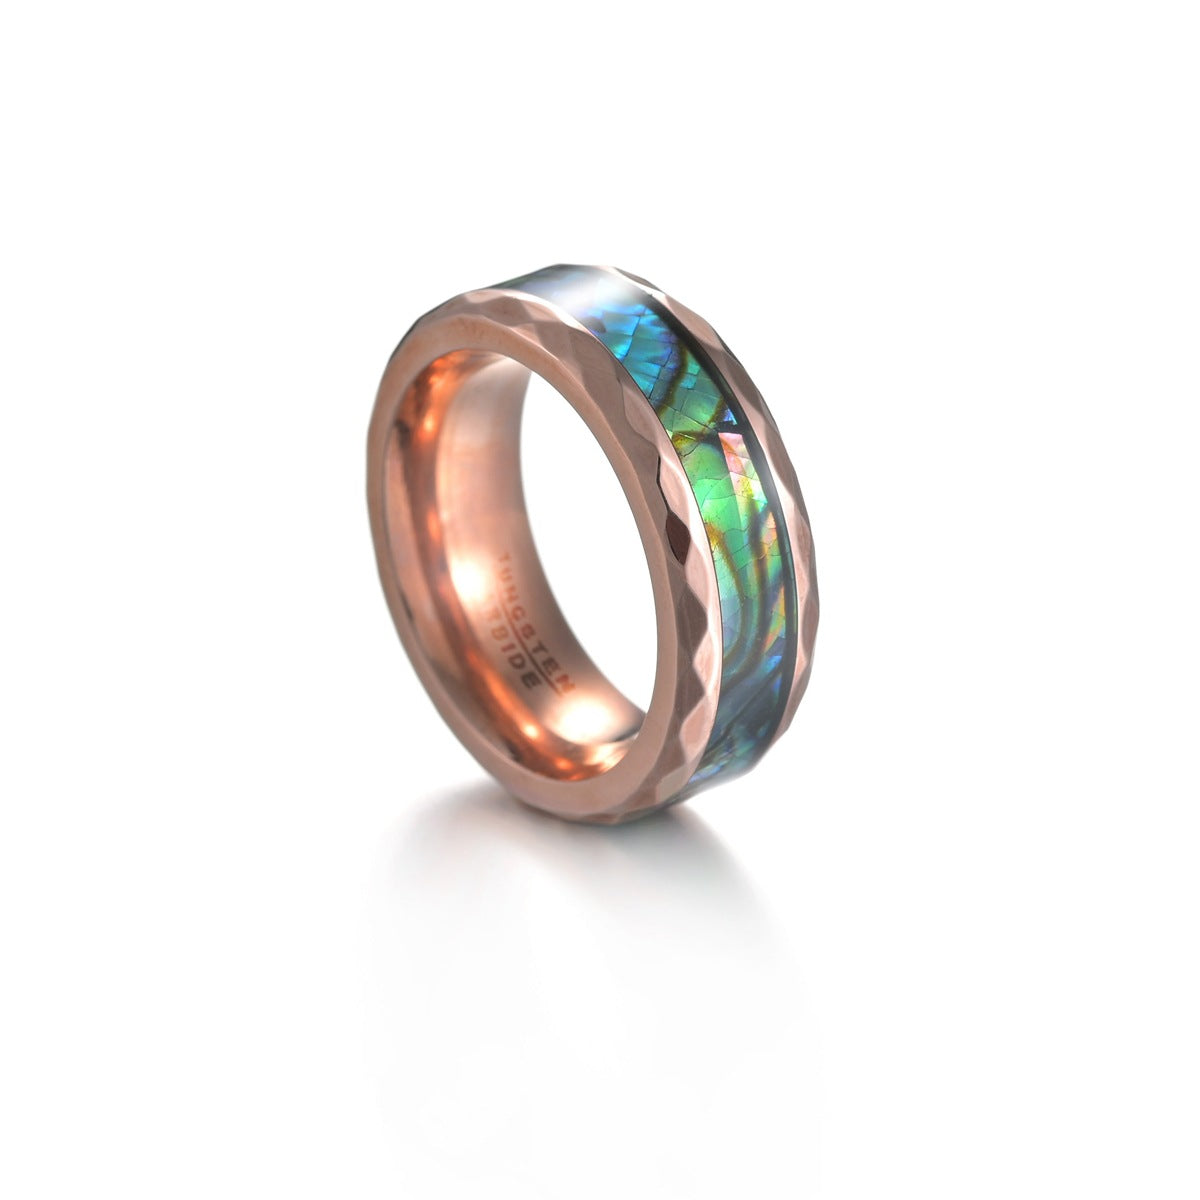 Black Rose Gold Tungsten Steel Men's Ring with Abalone Shell - Wholesale Jewelry for Men